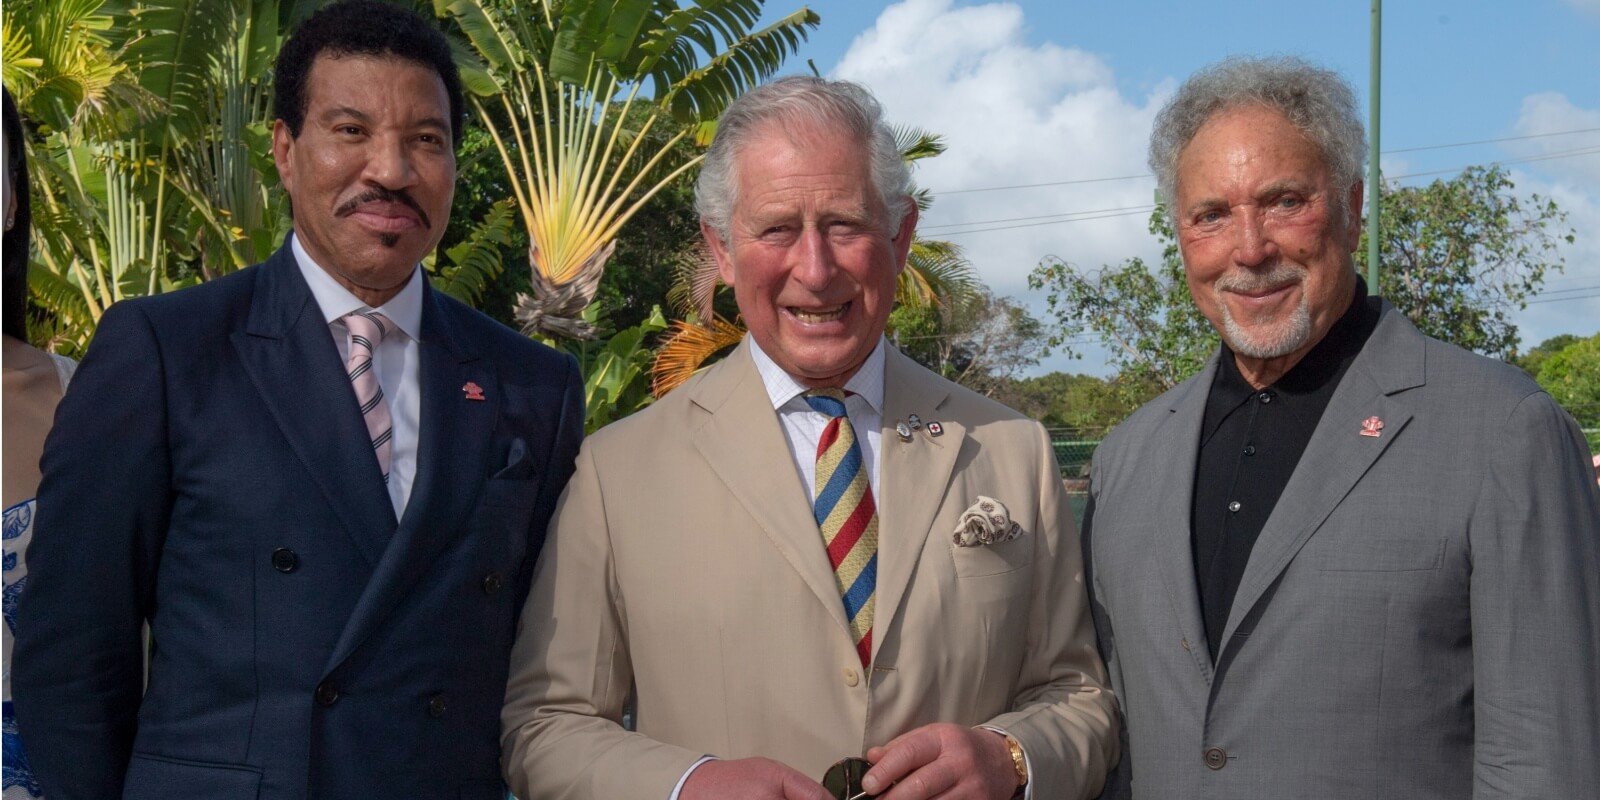 Lionel Richie, King Charles, and Tom Jones photographed together on March 19, 2019 in Folkestone, Barbados.